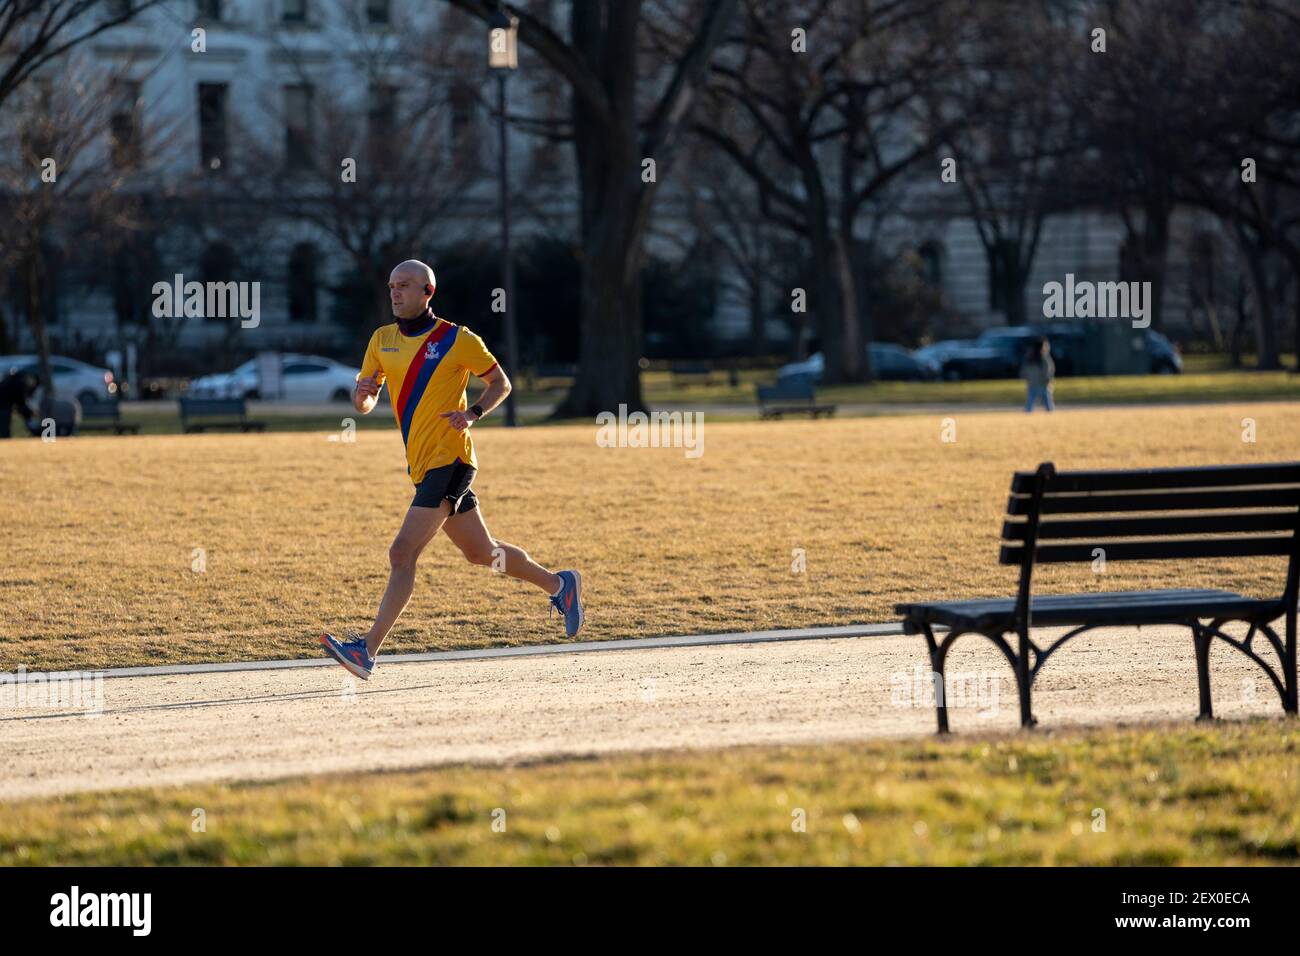 (210304) -- WASHINGTON, D.C., March 4, 2021 (Xinhua) -- A man jogs in Washington, DC, the United States, March 3, 2021. With a third COVID-19 vaccine now authorized for emergency use, U.S. states are ramping up vaccination efforts to curb coronavirus transmission and the spread of variants. (Xinhua/Liu Jie) Credit: Liu Jie/Xinhua/Alamy Live News Stock Photo